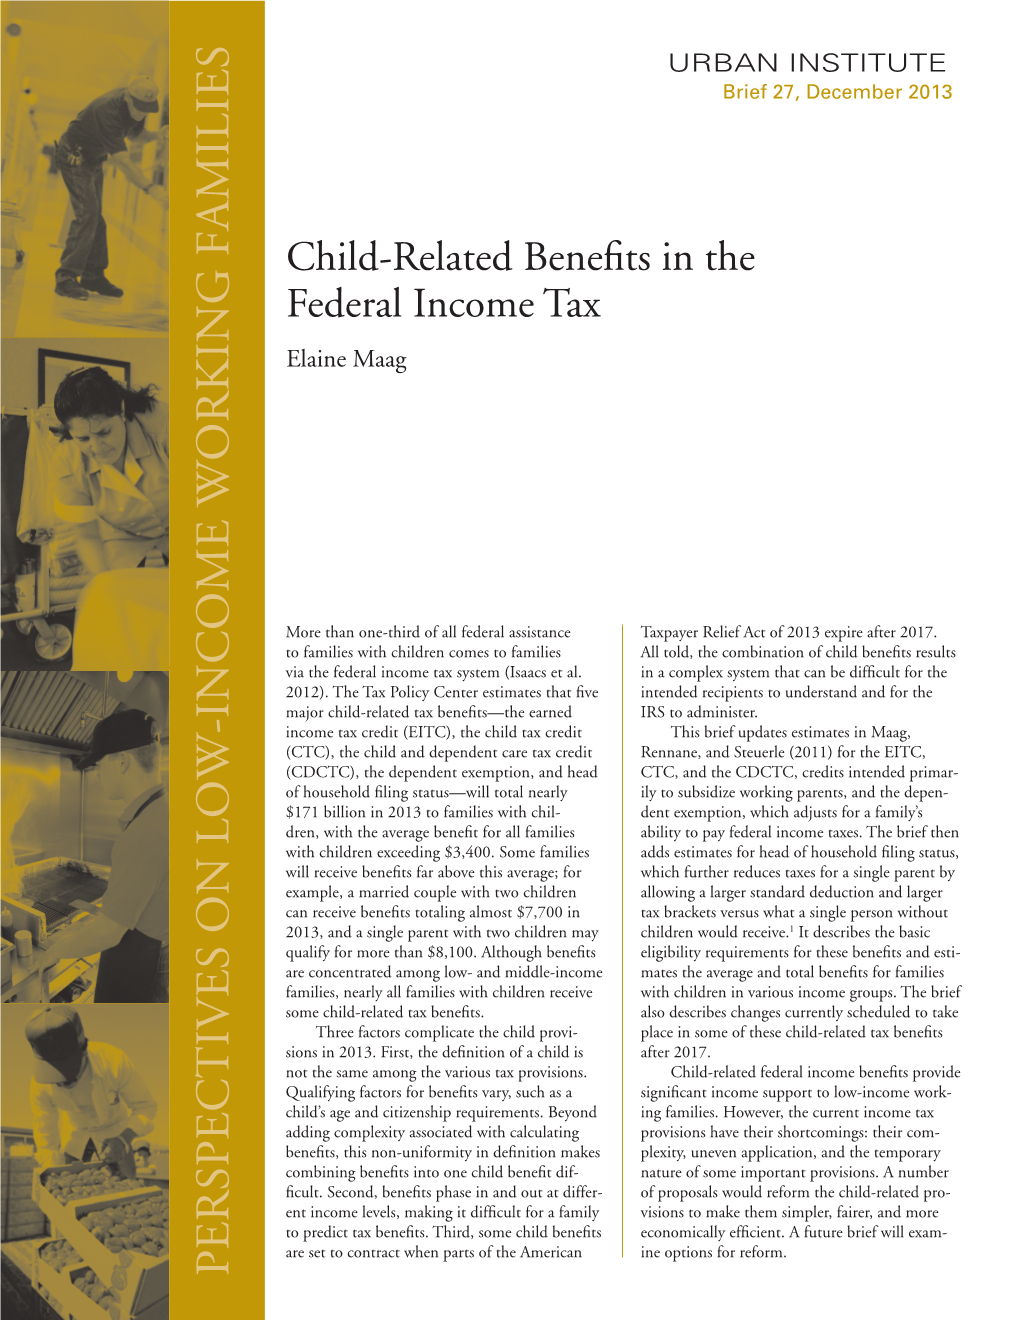 Child-Related Benefits in the Federal Income Tax Elaine Maag Orking Fami W